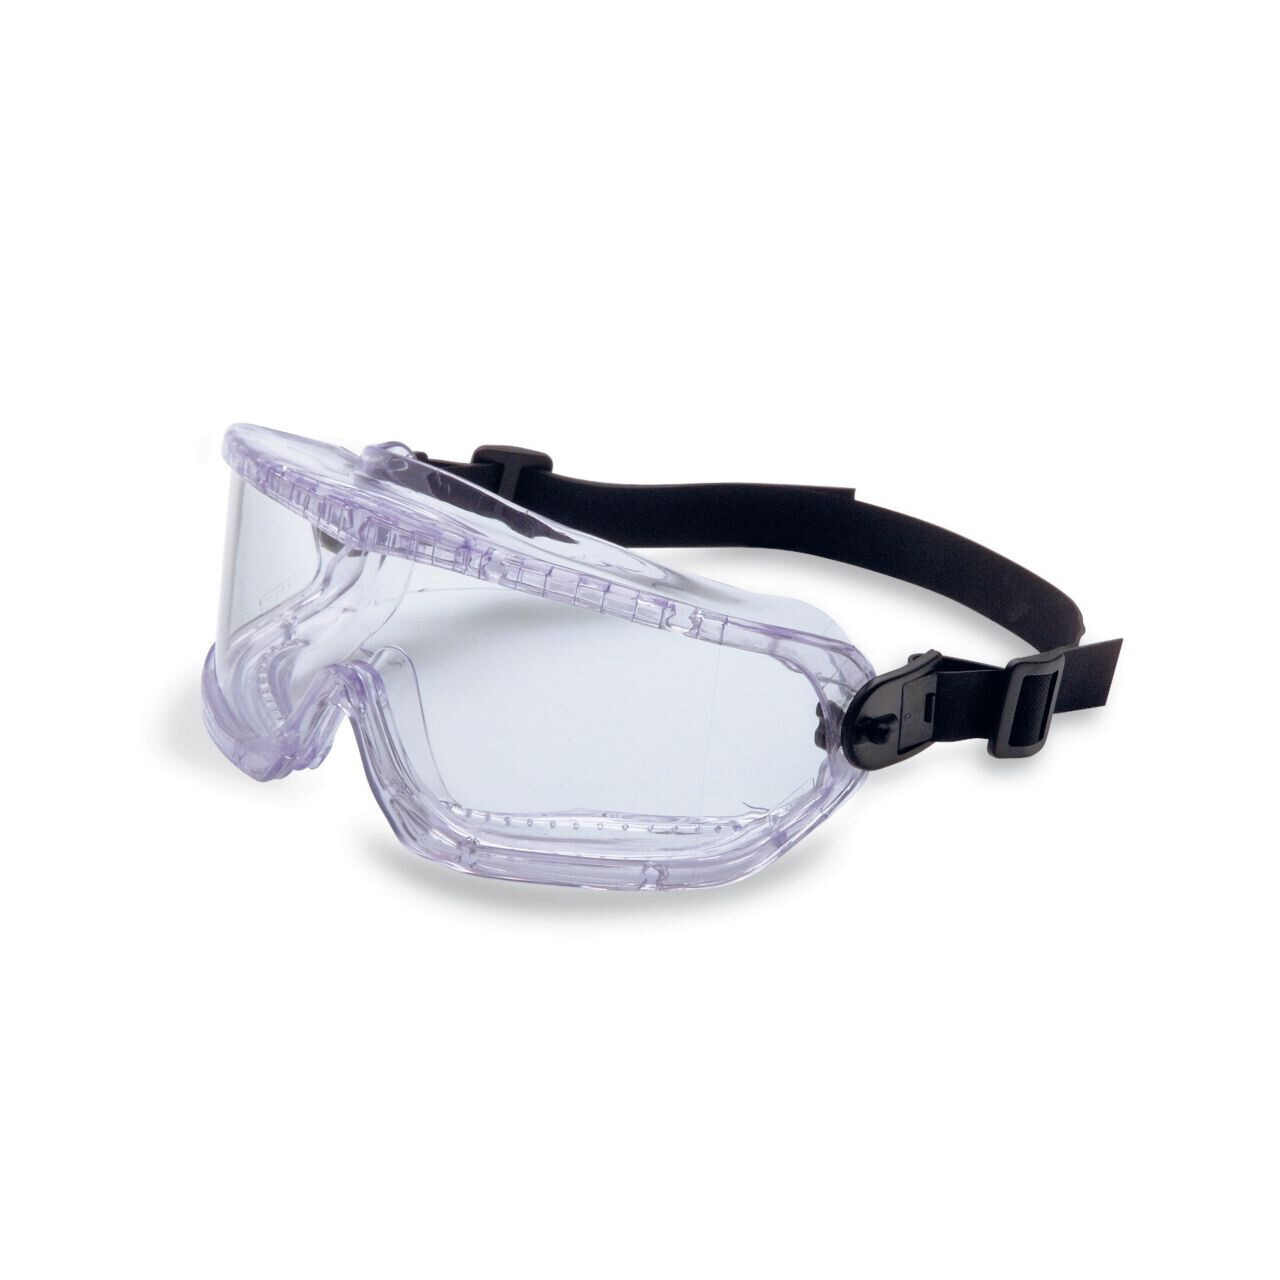 Uvex® by Honeywell V-Maxx® Indirect Vent Protective Goggles, Clear Frame, Uvextra® Anti-Fog Clear Lens